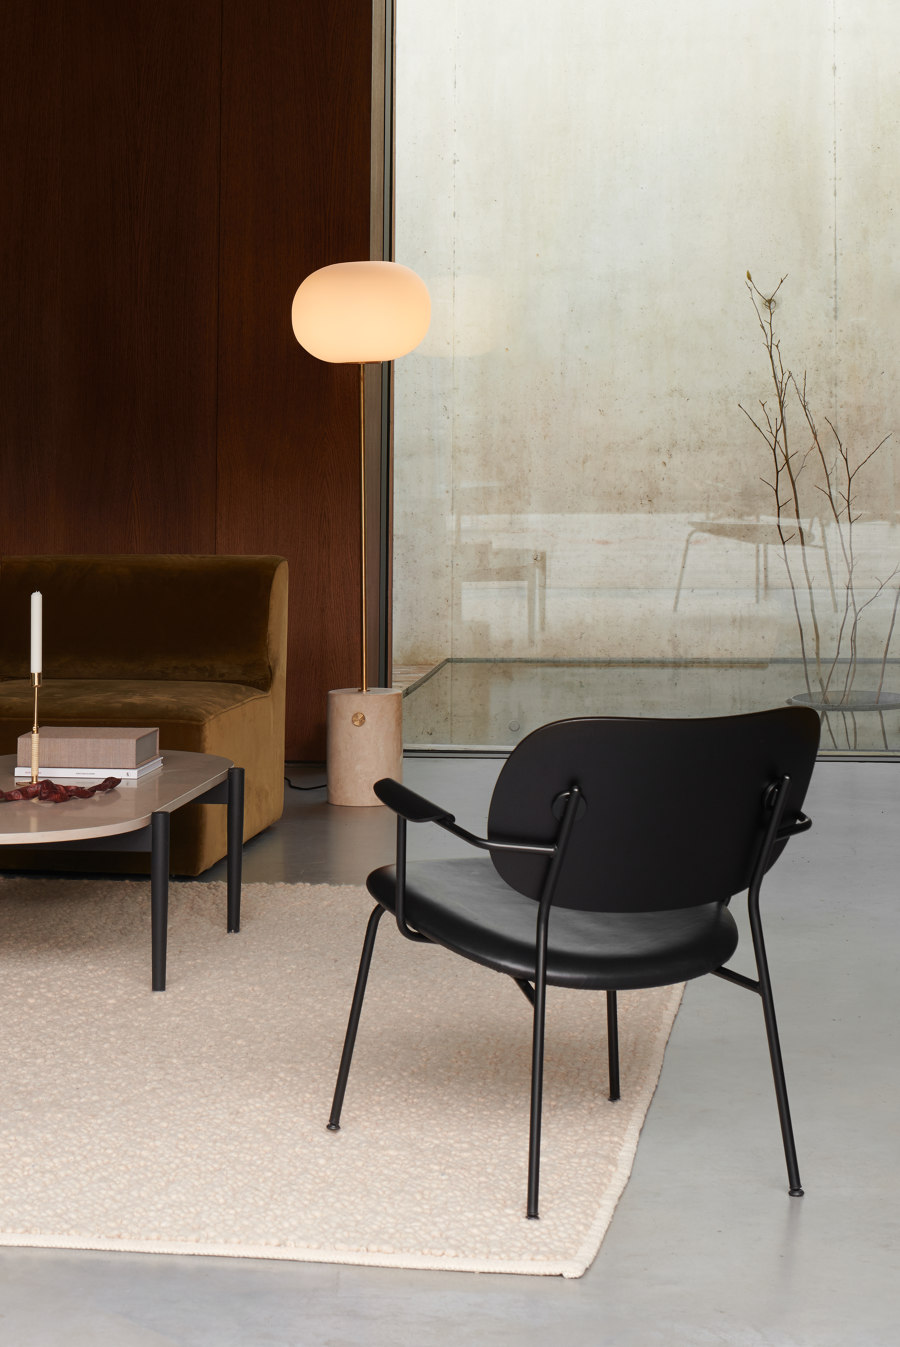 Light on its feet: Co Lounge Chair by MENU | Novedades